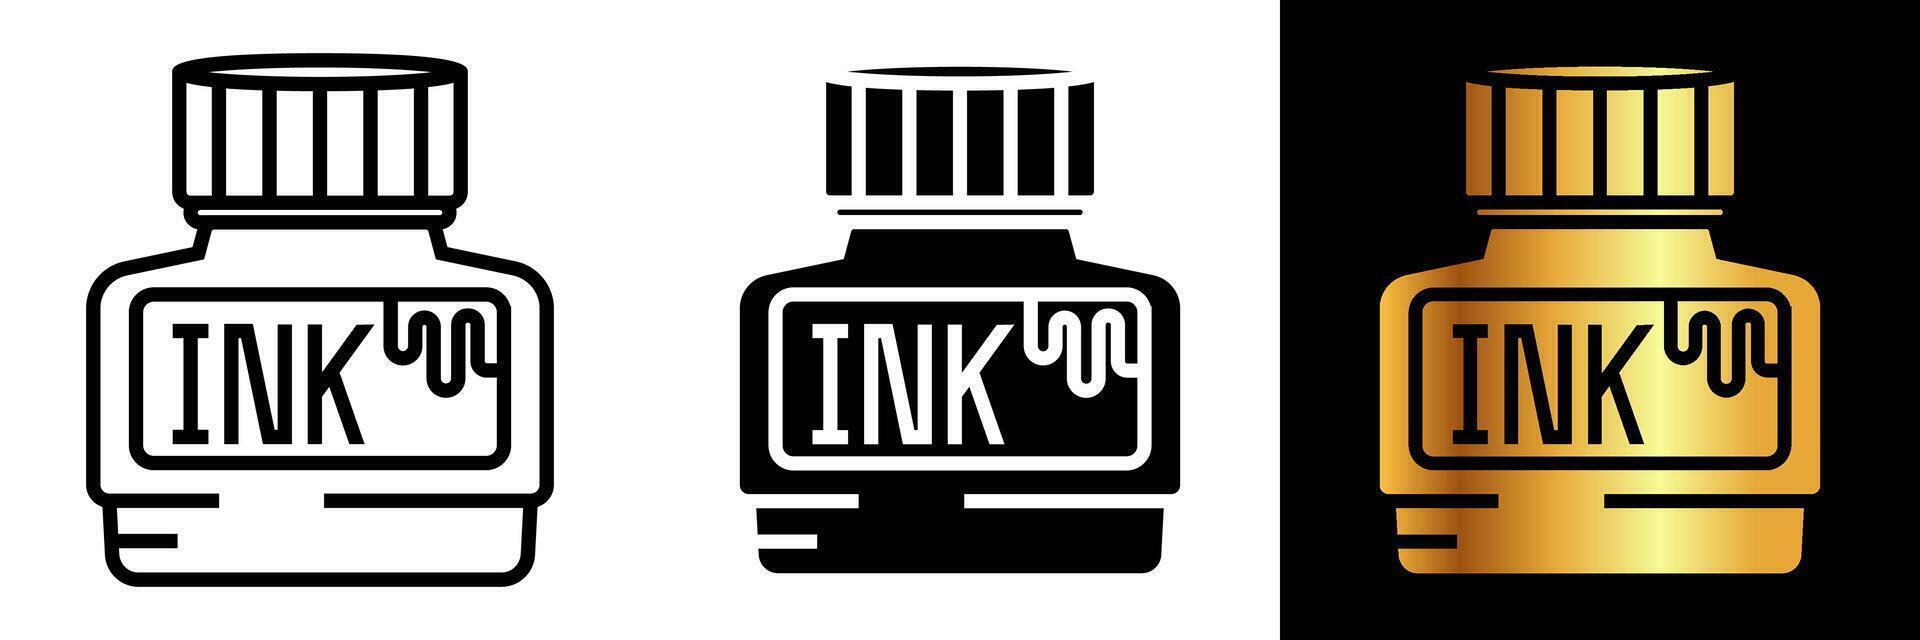 The Ink Droplet icon symbolizes the fundamental essence of creative expression, serving as the lifeblood for artists, writers, and creators across various mediums. vector